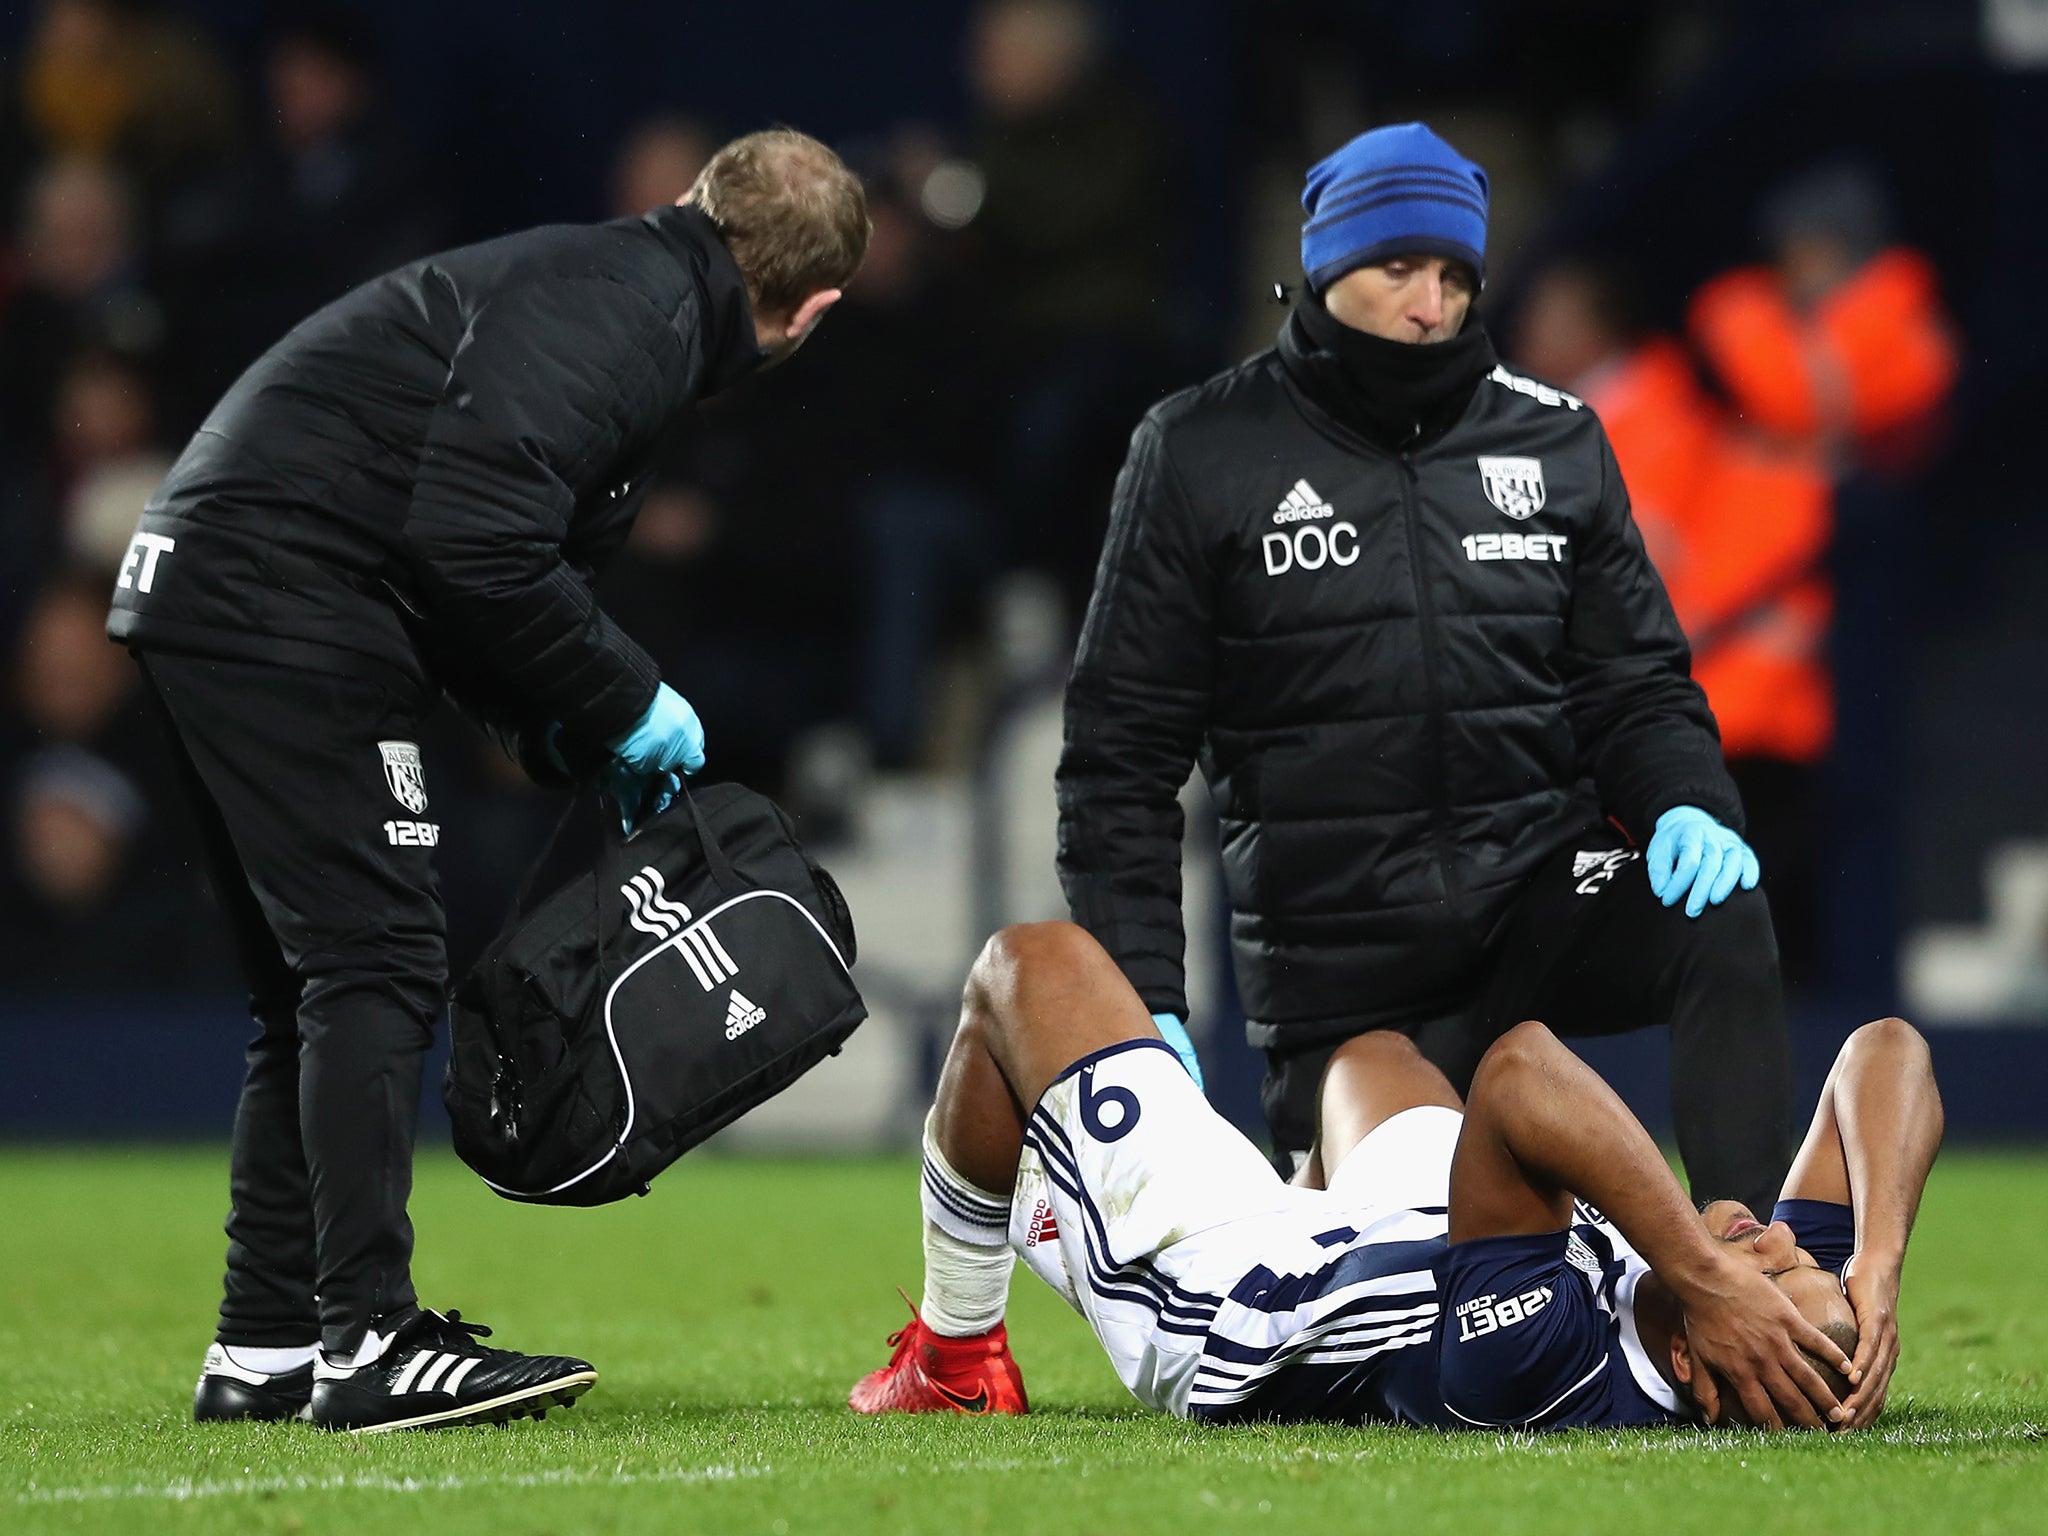 Salomon Rondon was forced off with injury